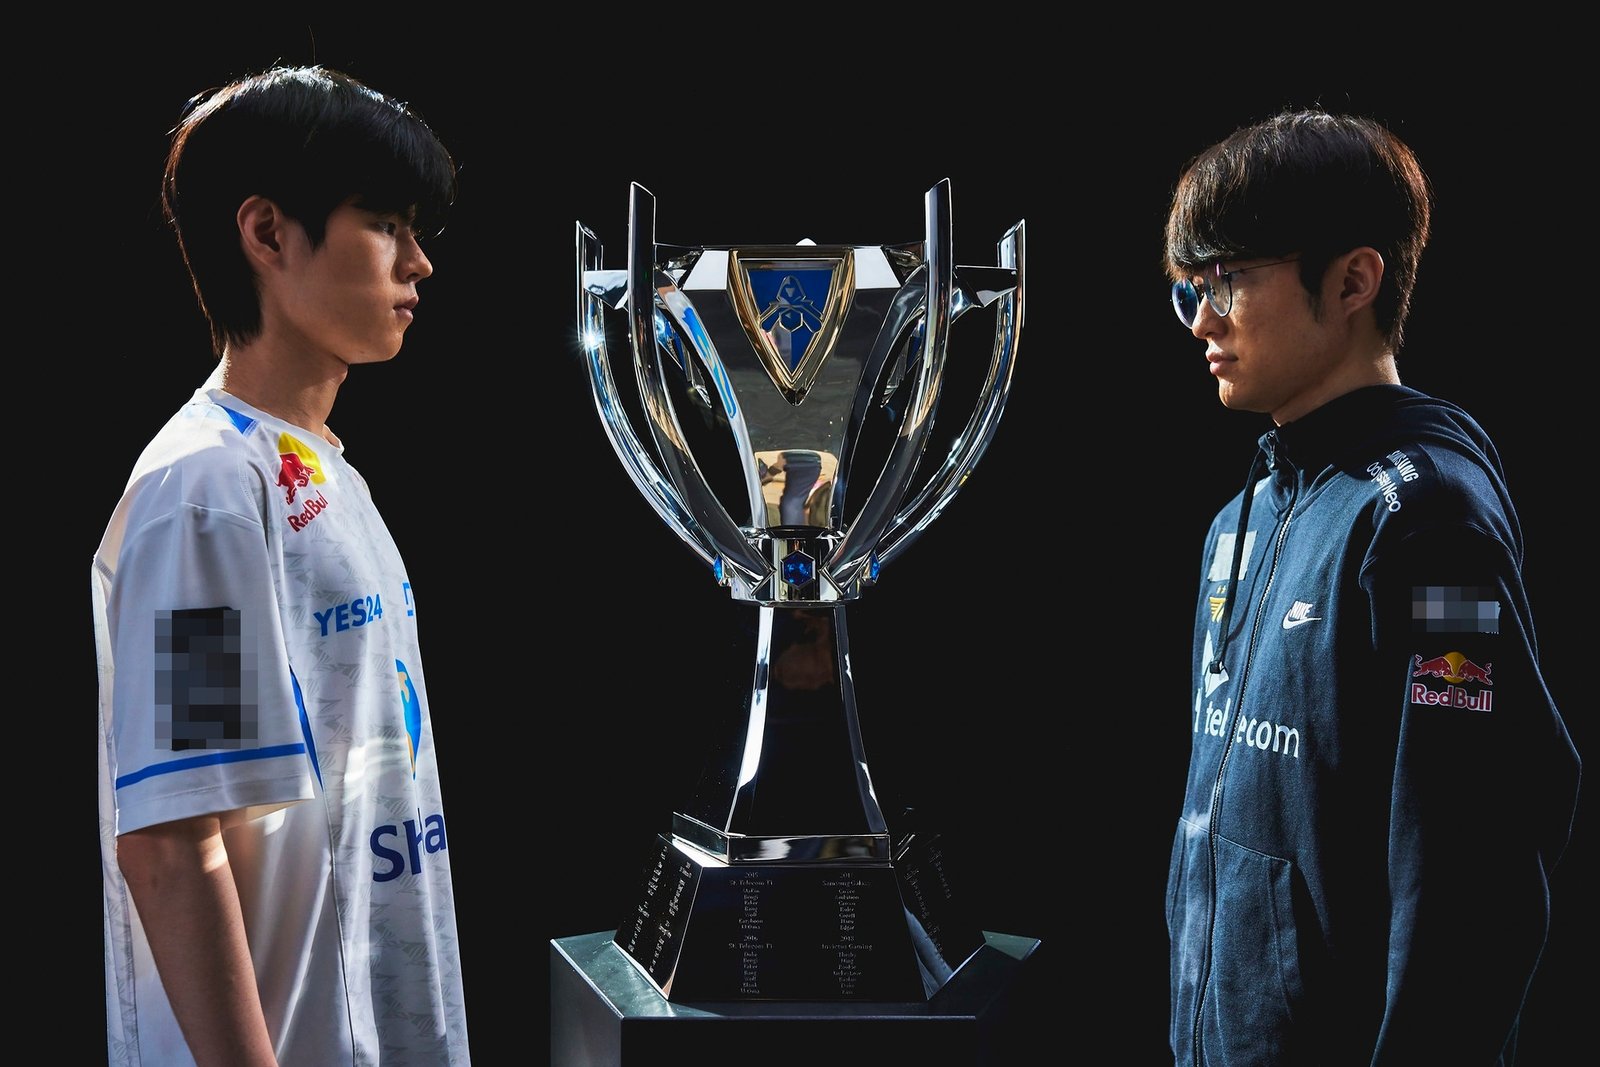 MaRin has proven that LPL is increasingly far behind LCK